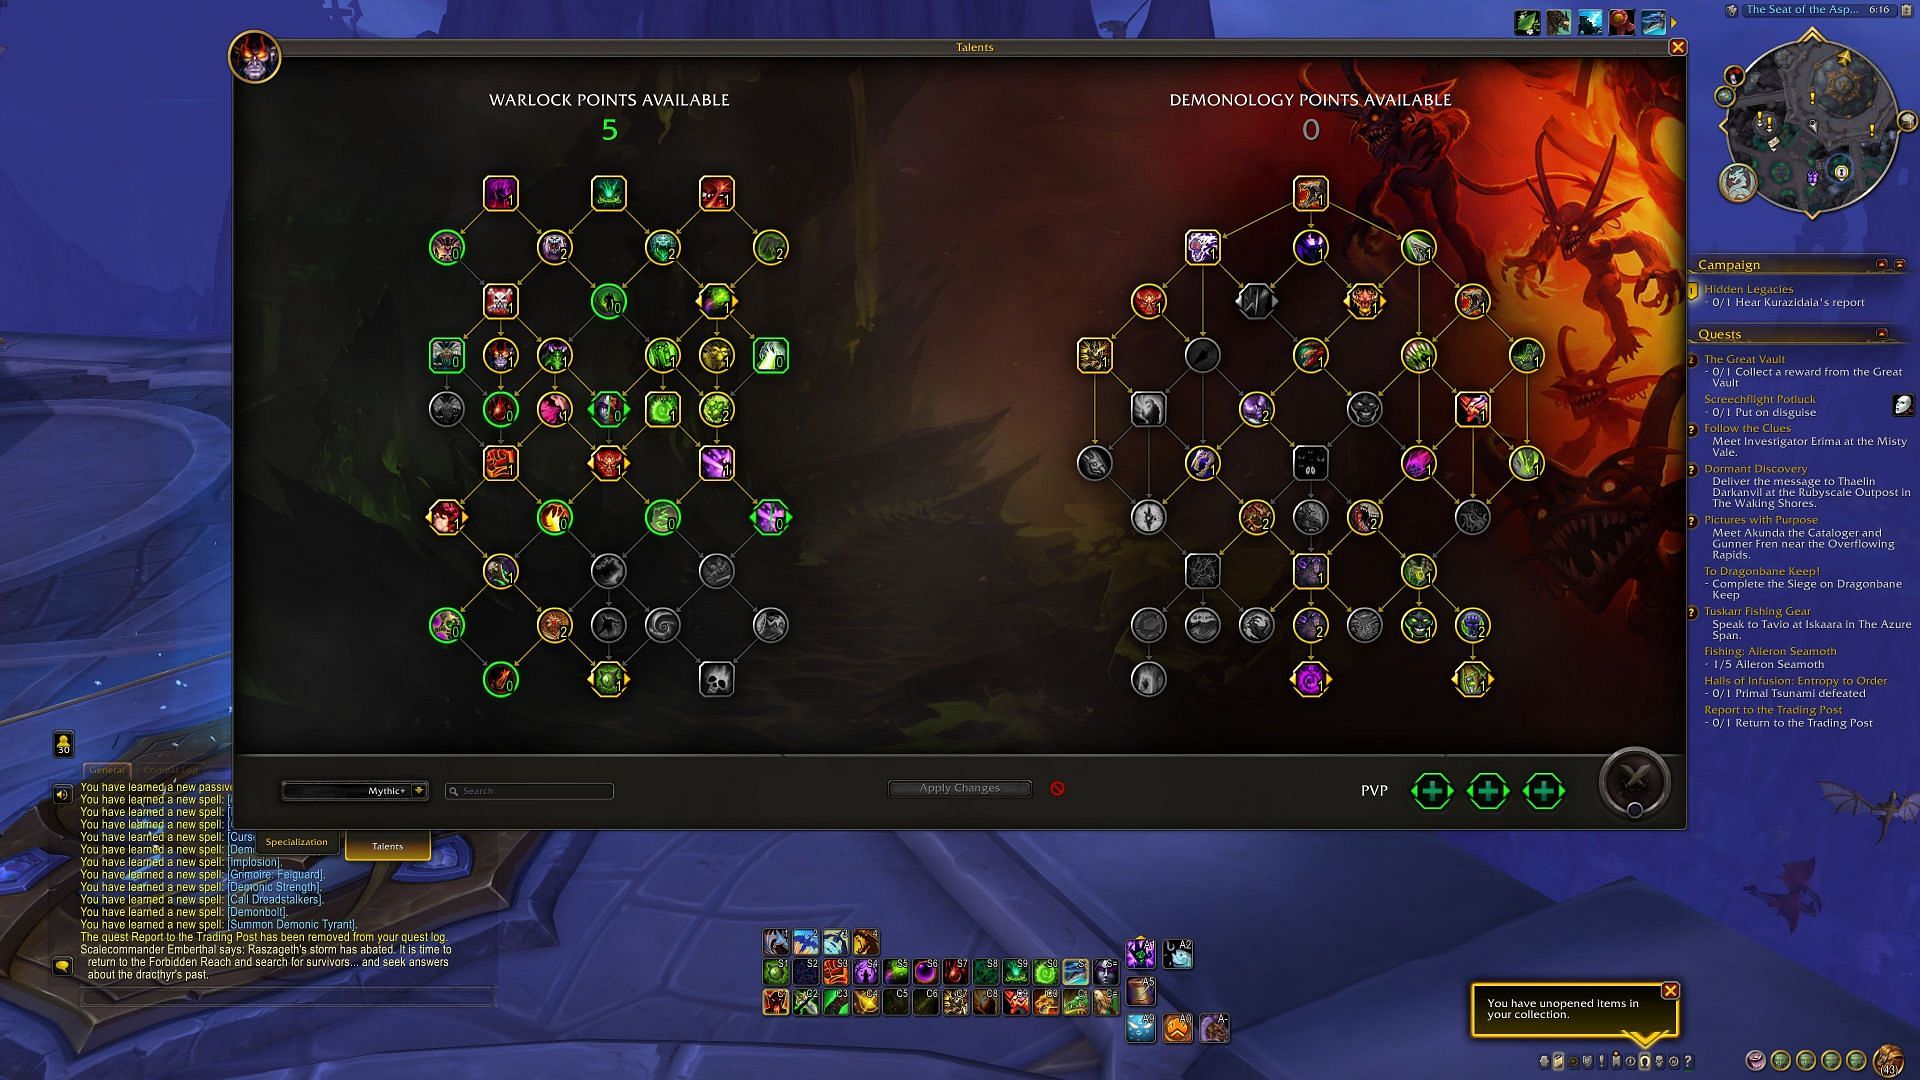 Every build has a variety of possibilities for the talent tree in World of Warcraft (Image via Blizzard Games)